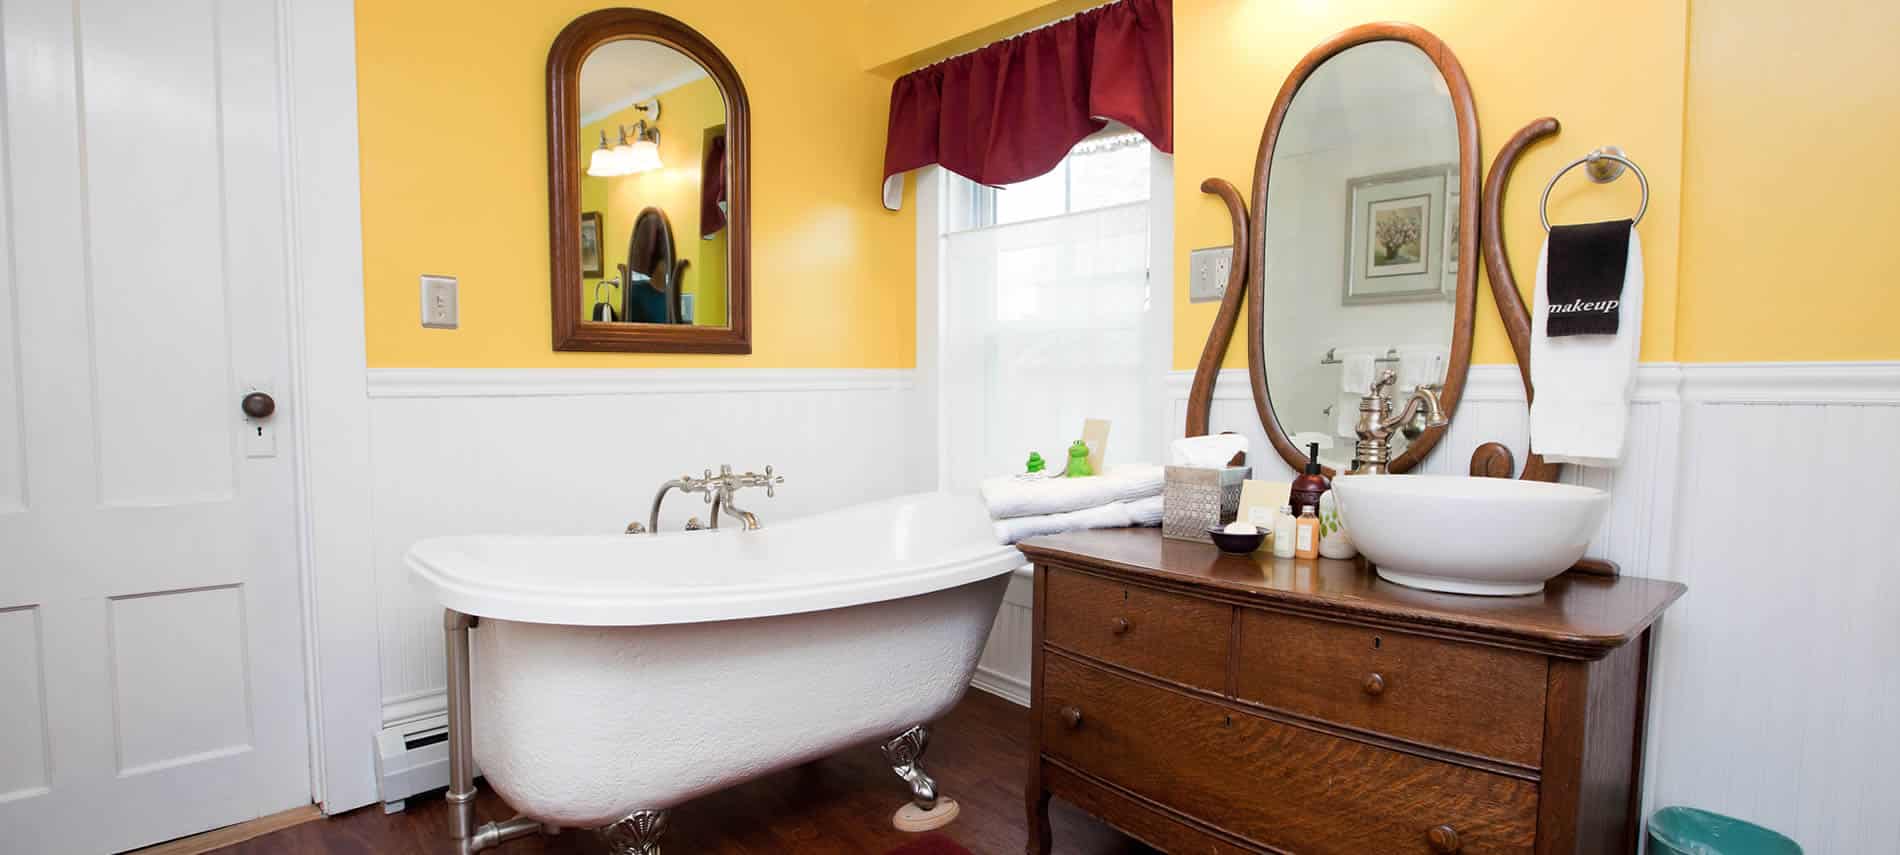 Prince Alfred guest bath with white and yellow walls, clawfoot tub and antique vanity with vessel sink and mirror